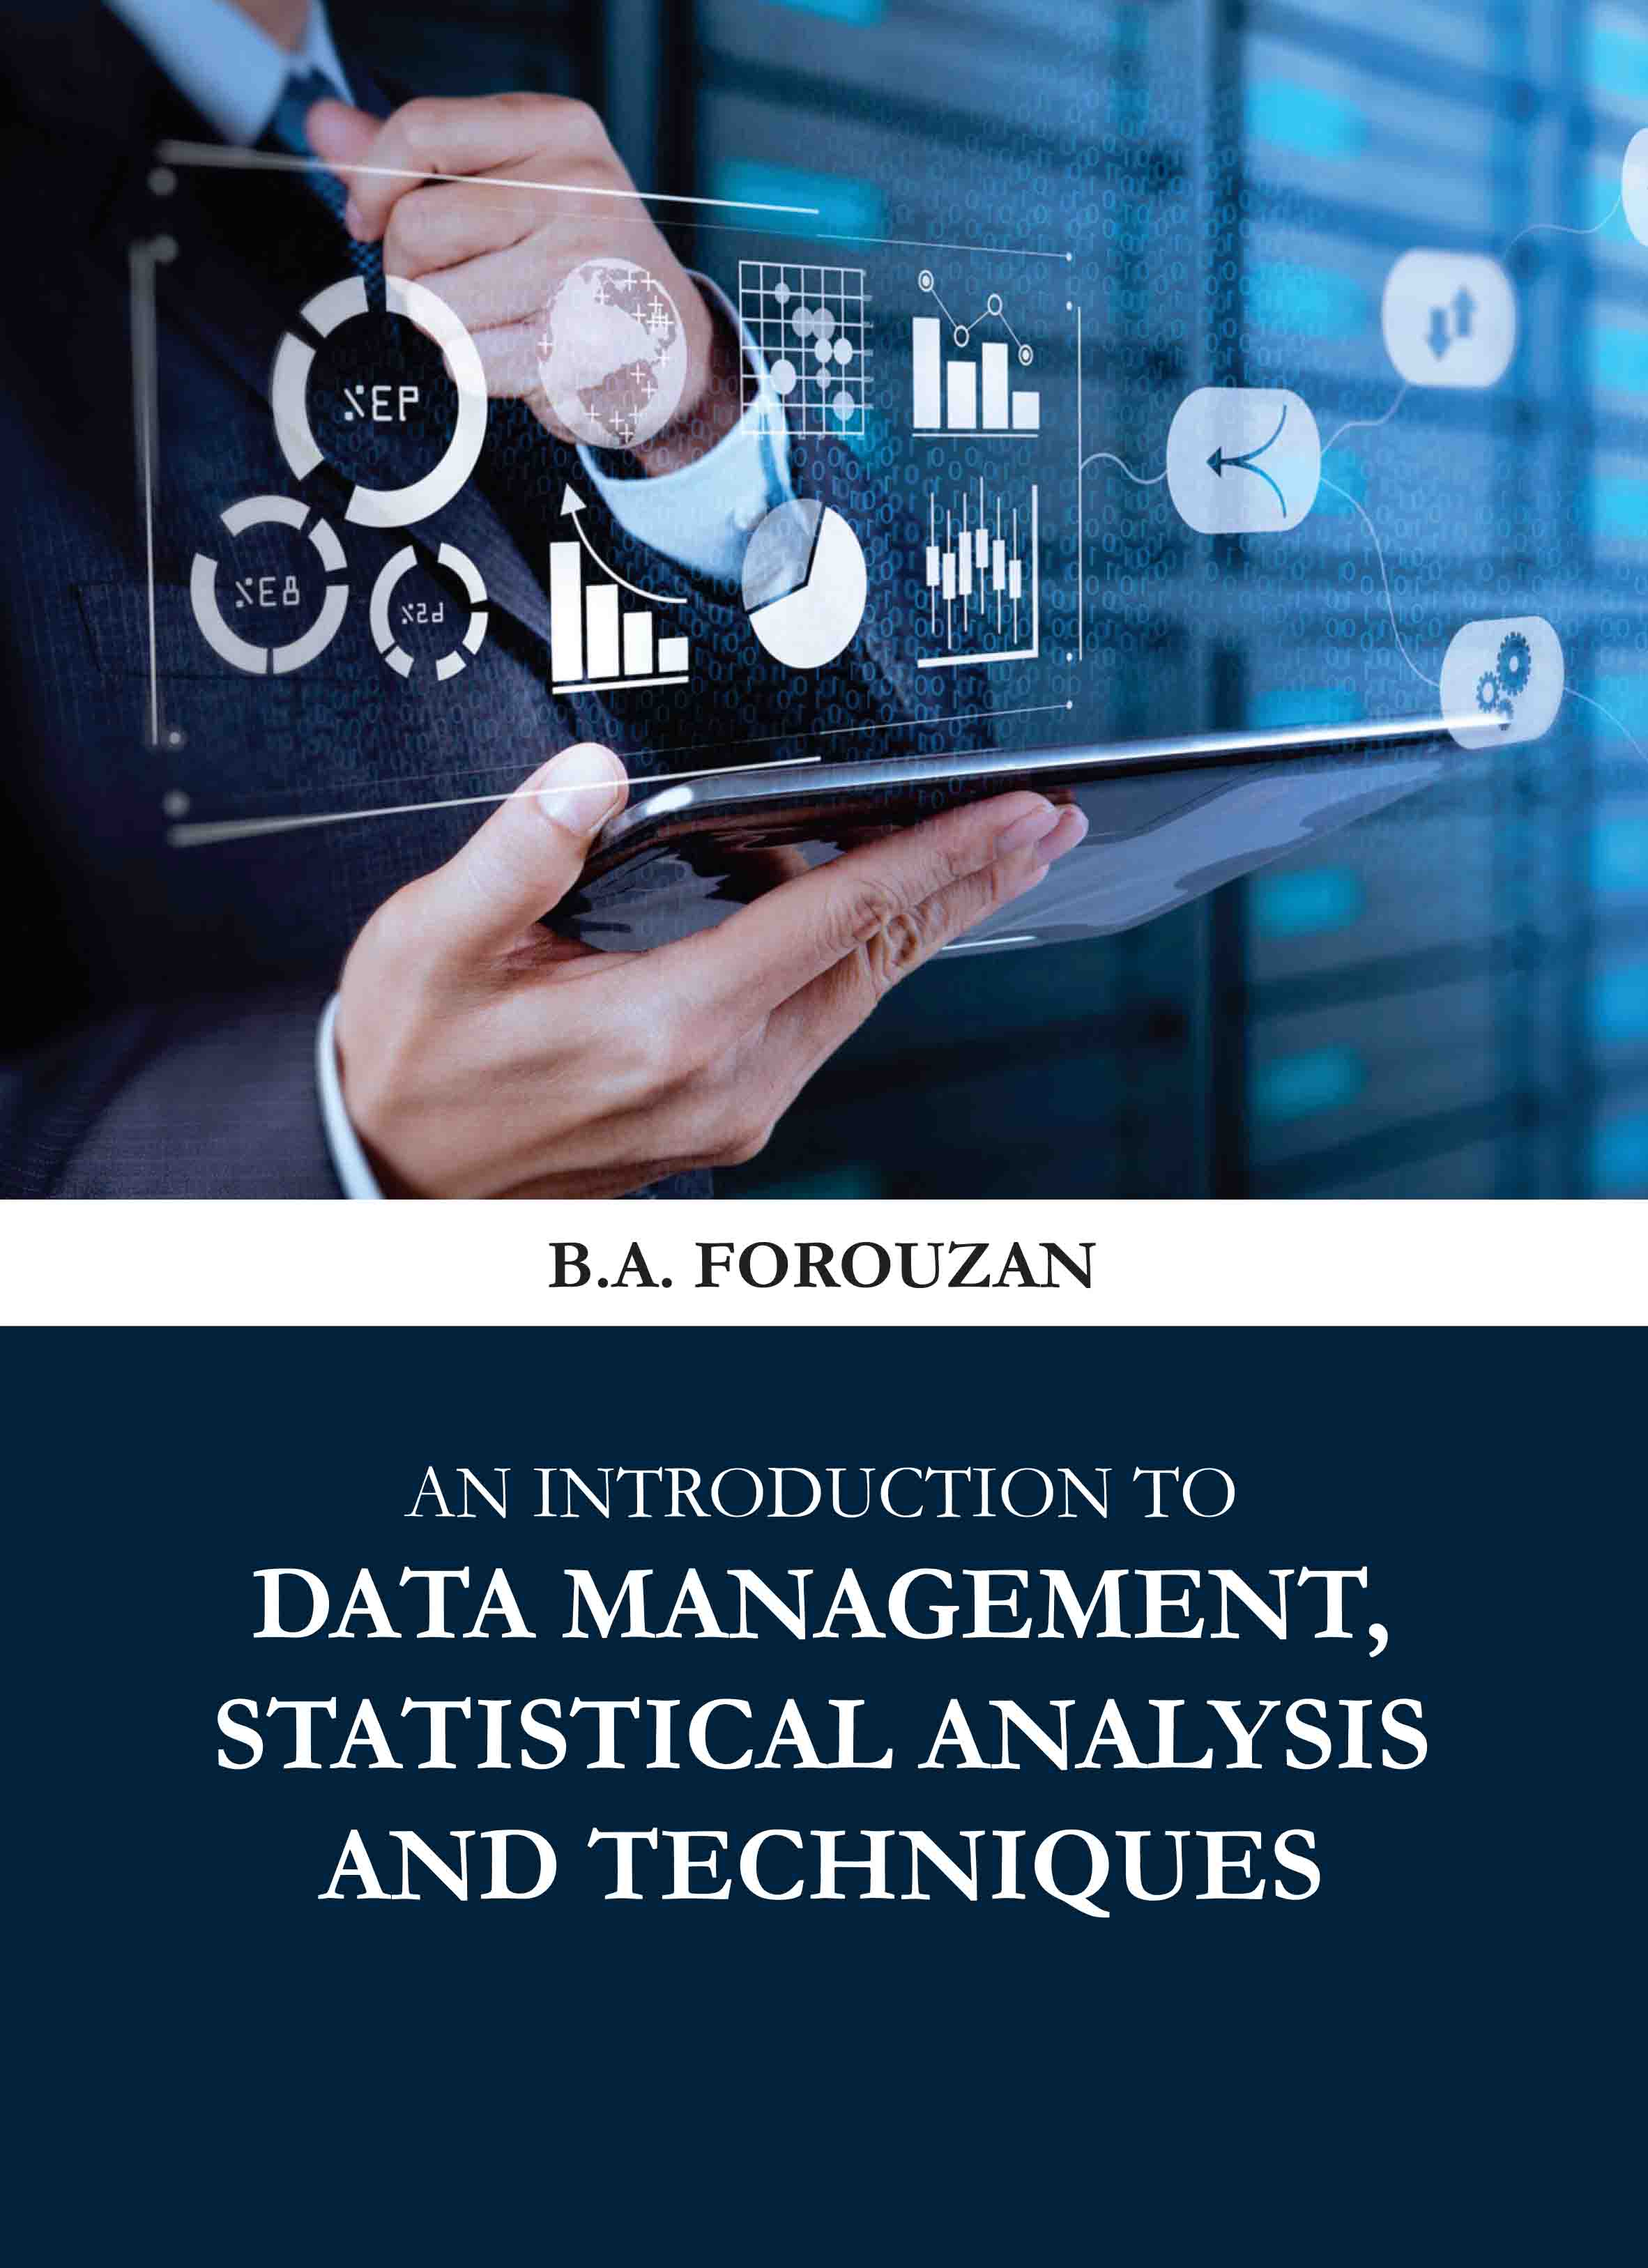 An Introduction to Data Management, Statistical Analysis and Techniques